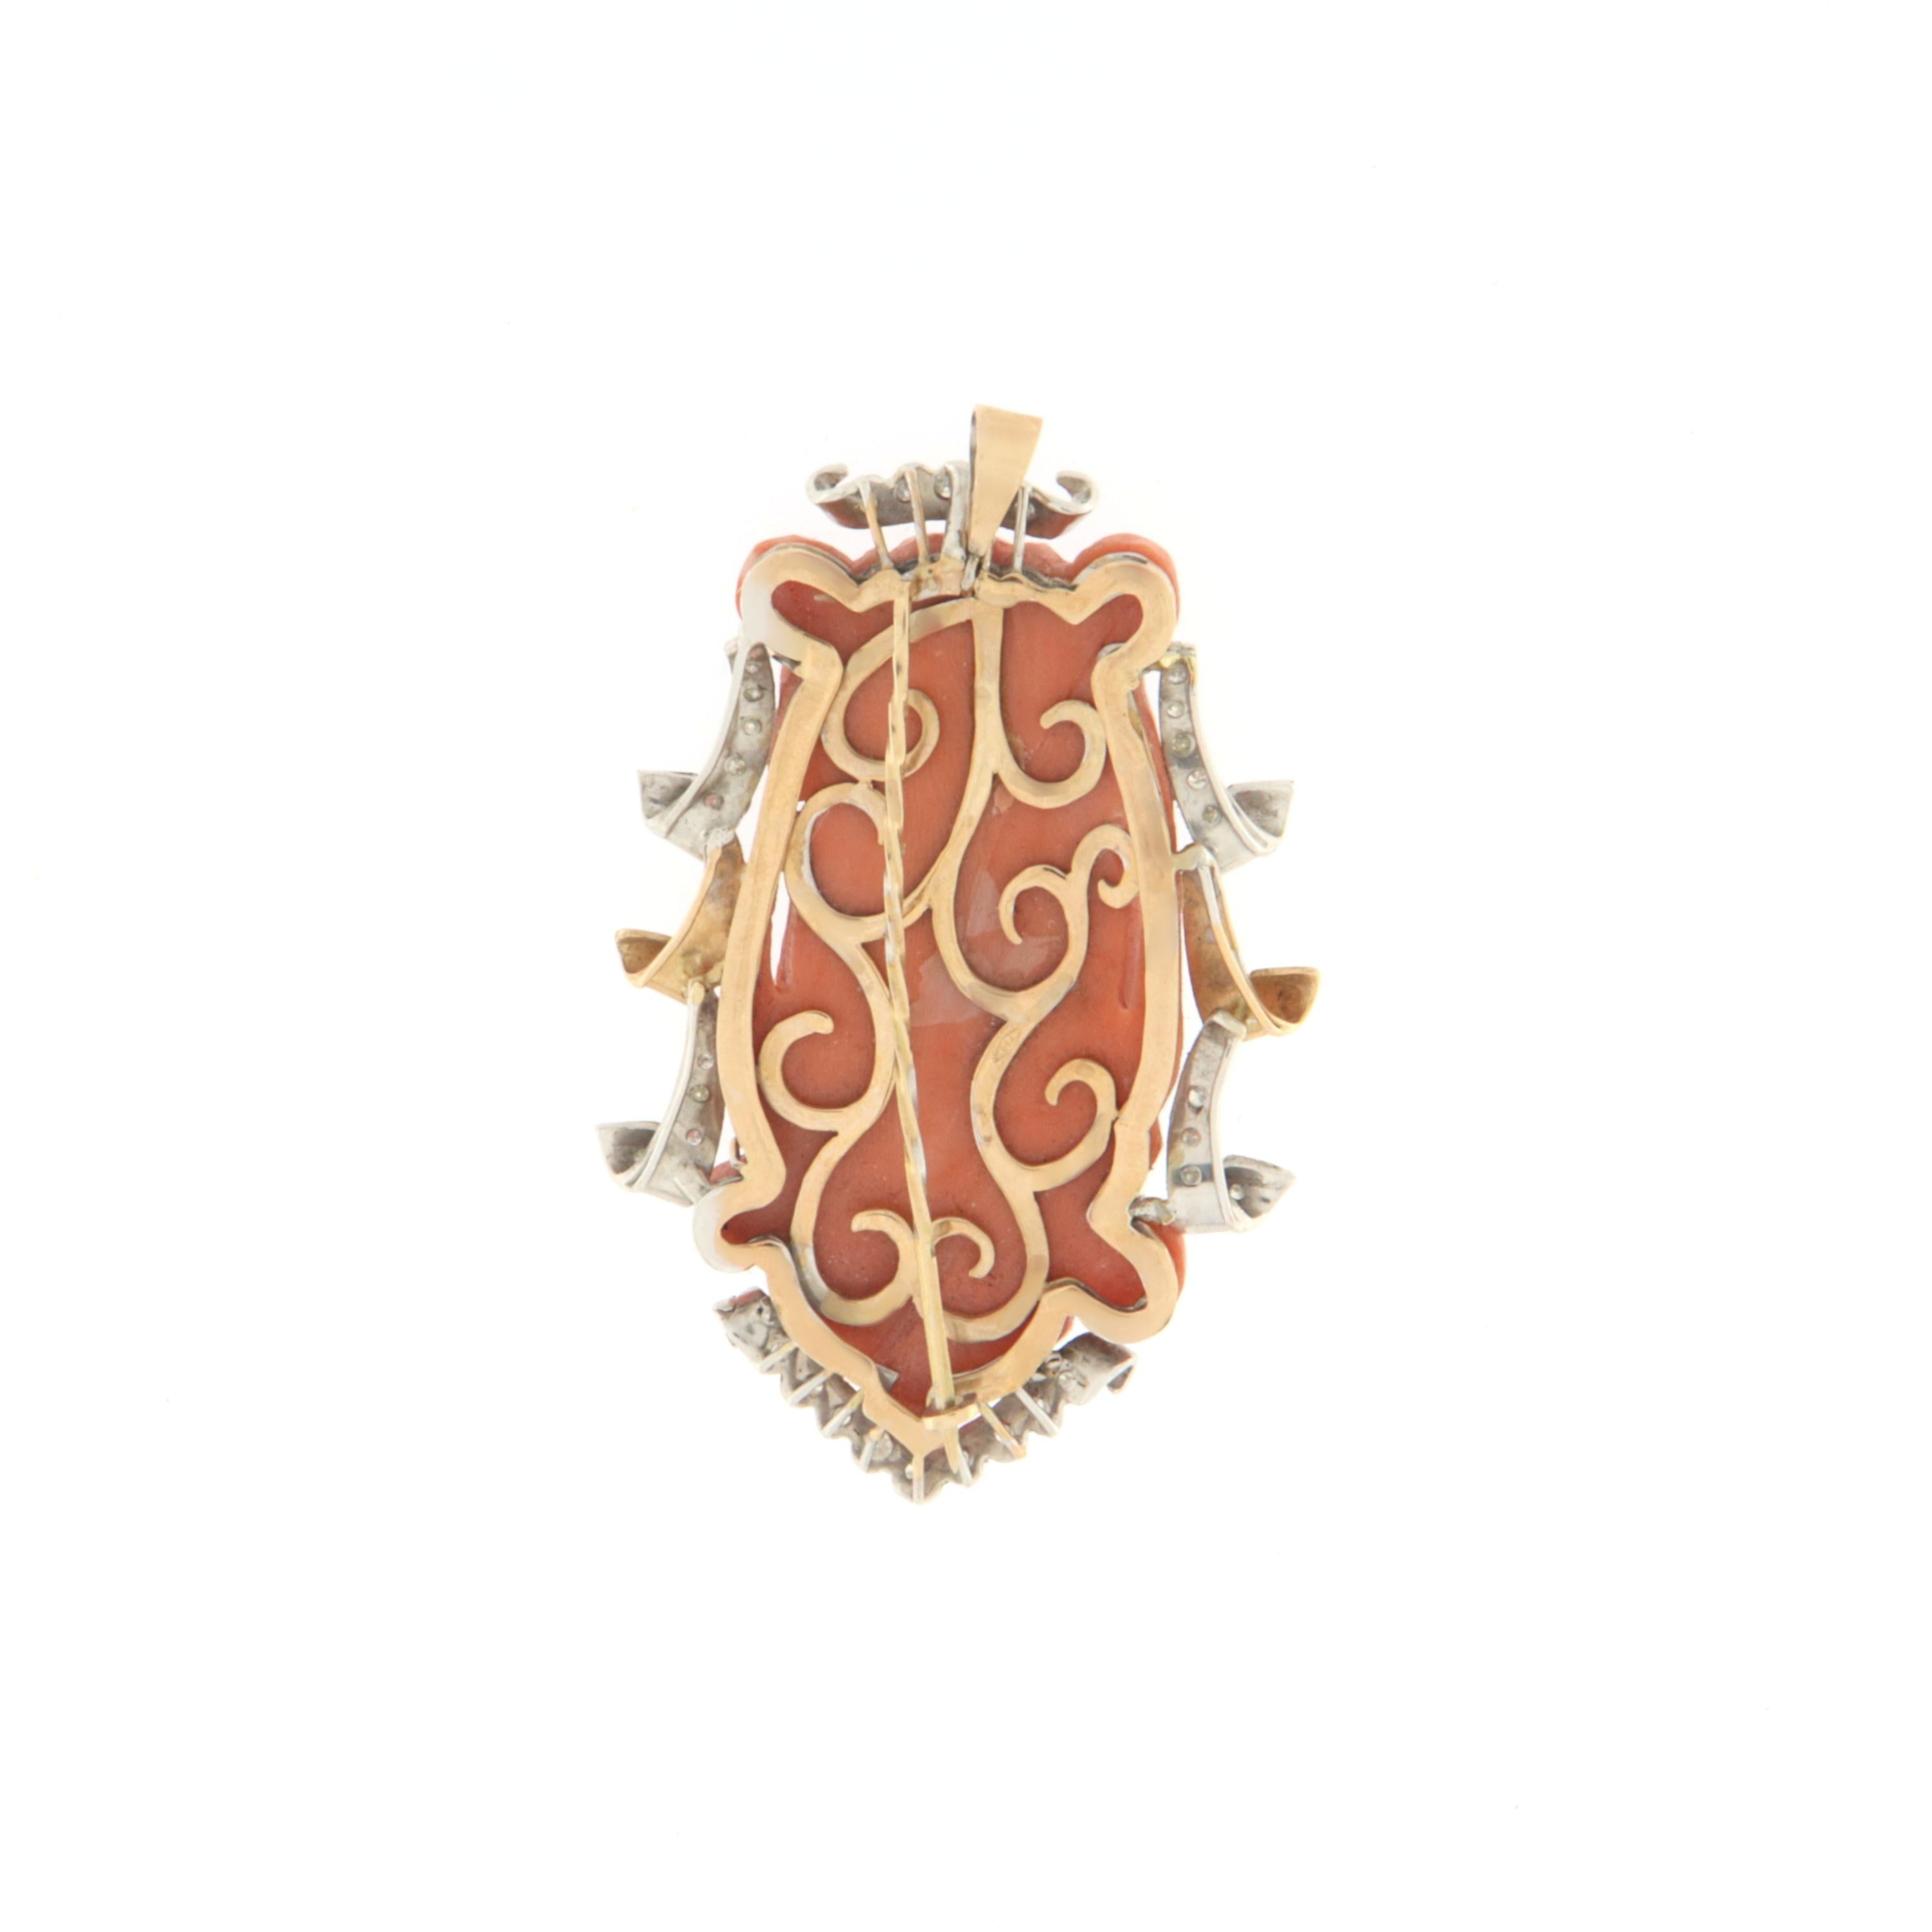 Brilliant Cut Cameo Coral Diamonds 14 Karat Yellow and White Gold Brooch And Pendant  For Sale